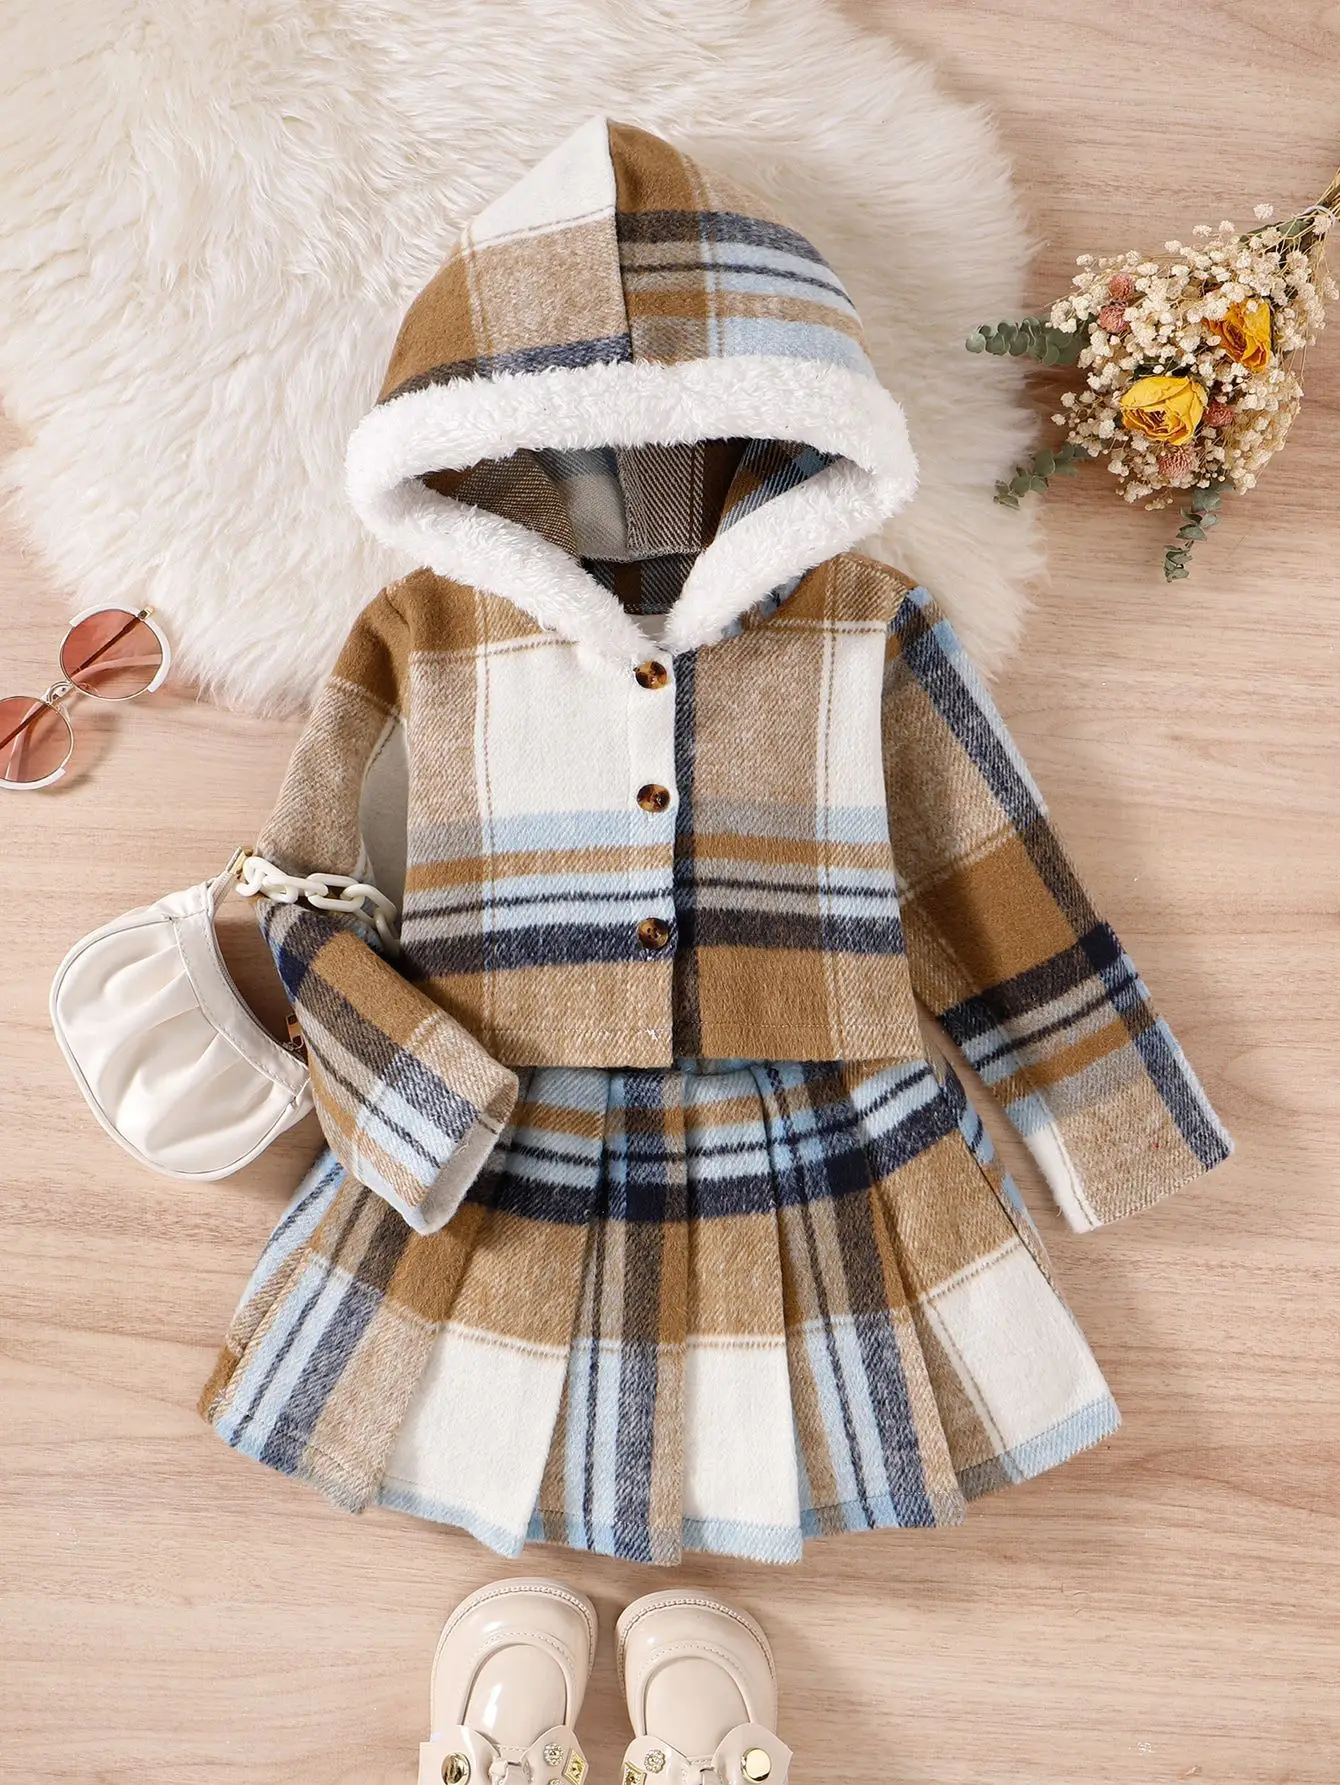 High quality new autumn kids clothes girls boutique outfits lamb plaid hoodie tops+pleated skirt warm toddler clothing